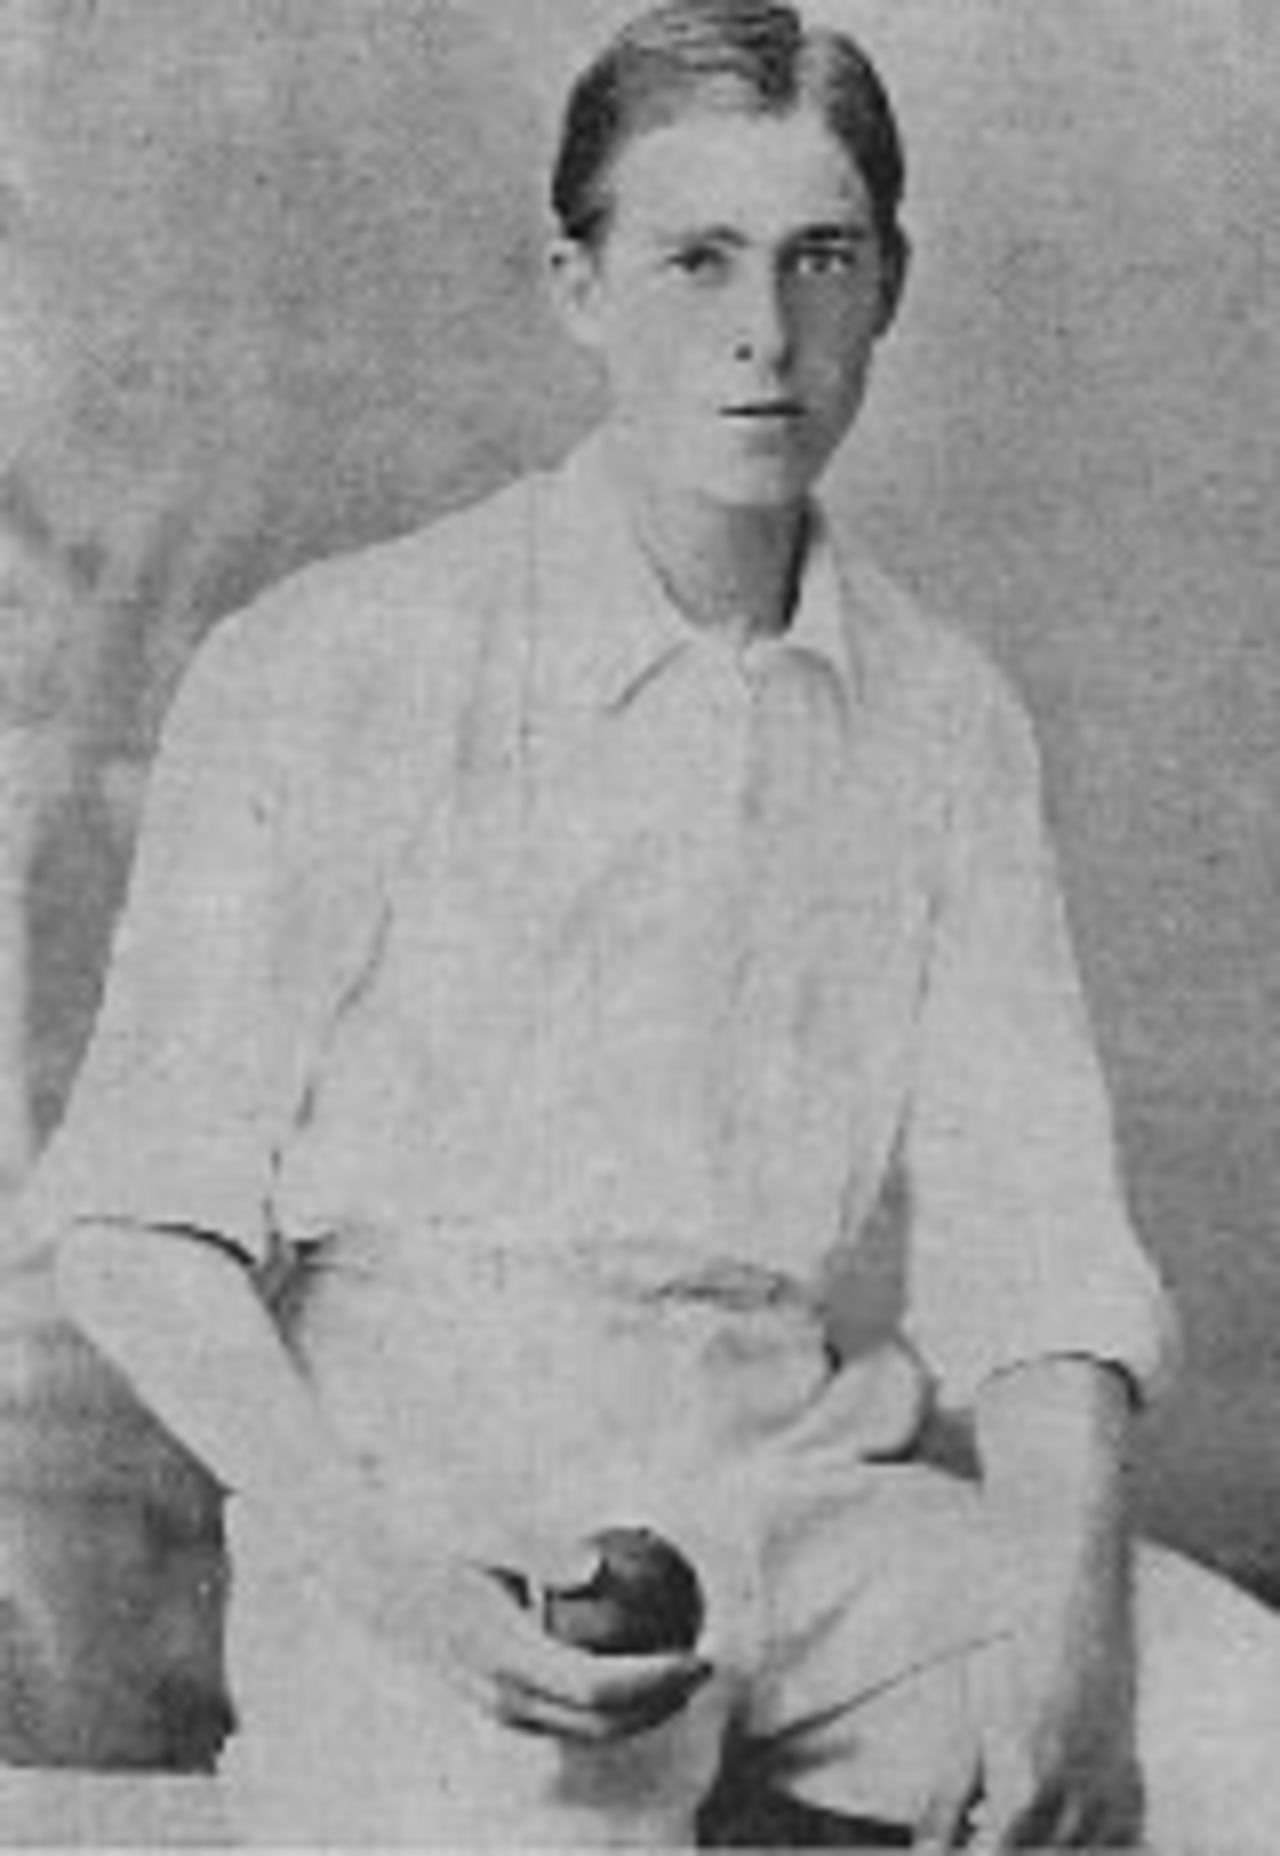 Digby Loder Armroid Jephson - a fast-medium bowler, he took up lob bowling after leaving Cambridge